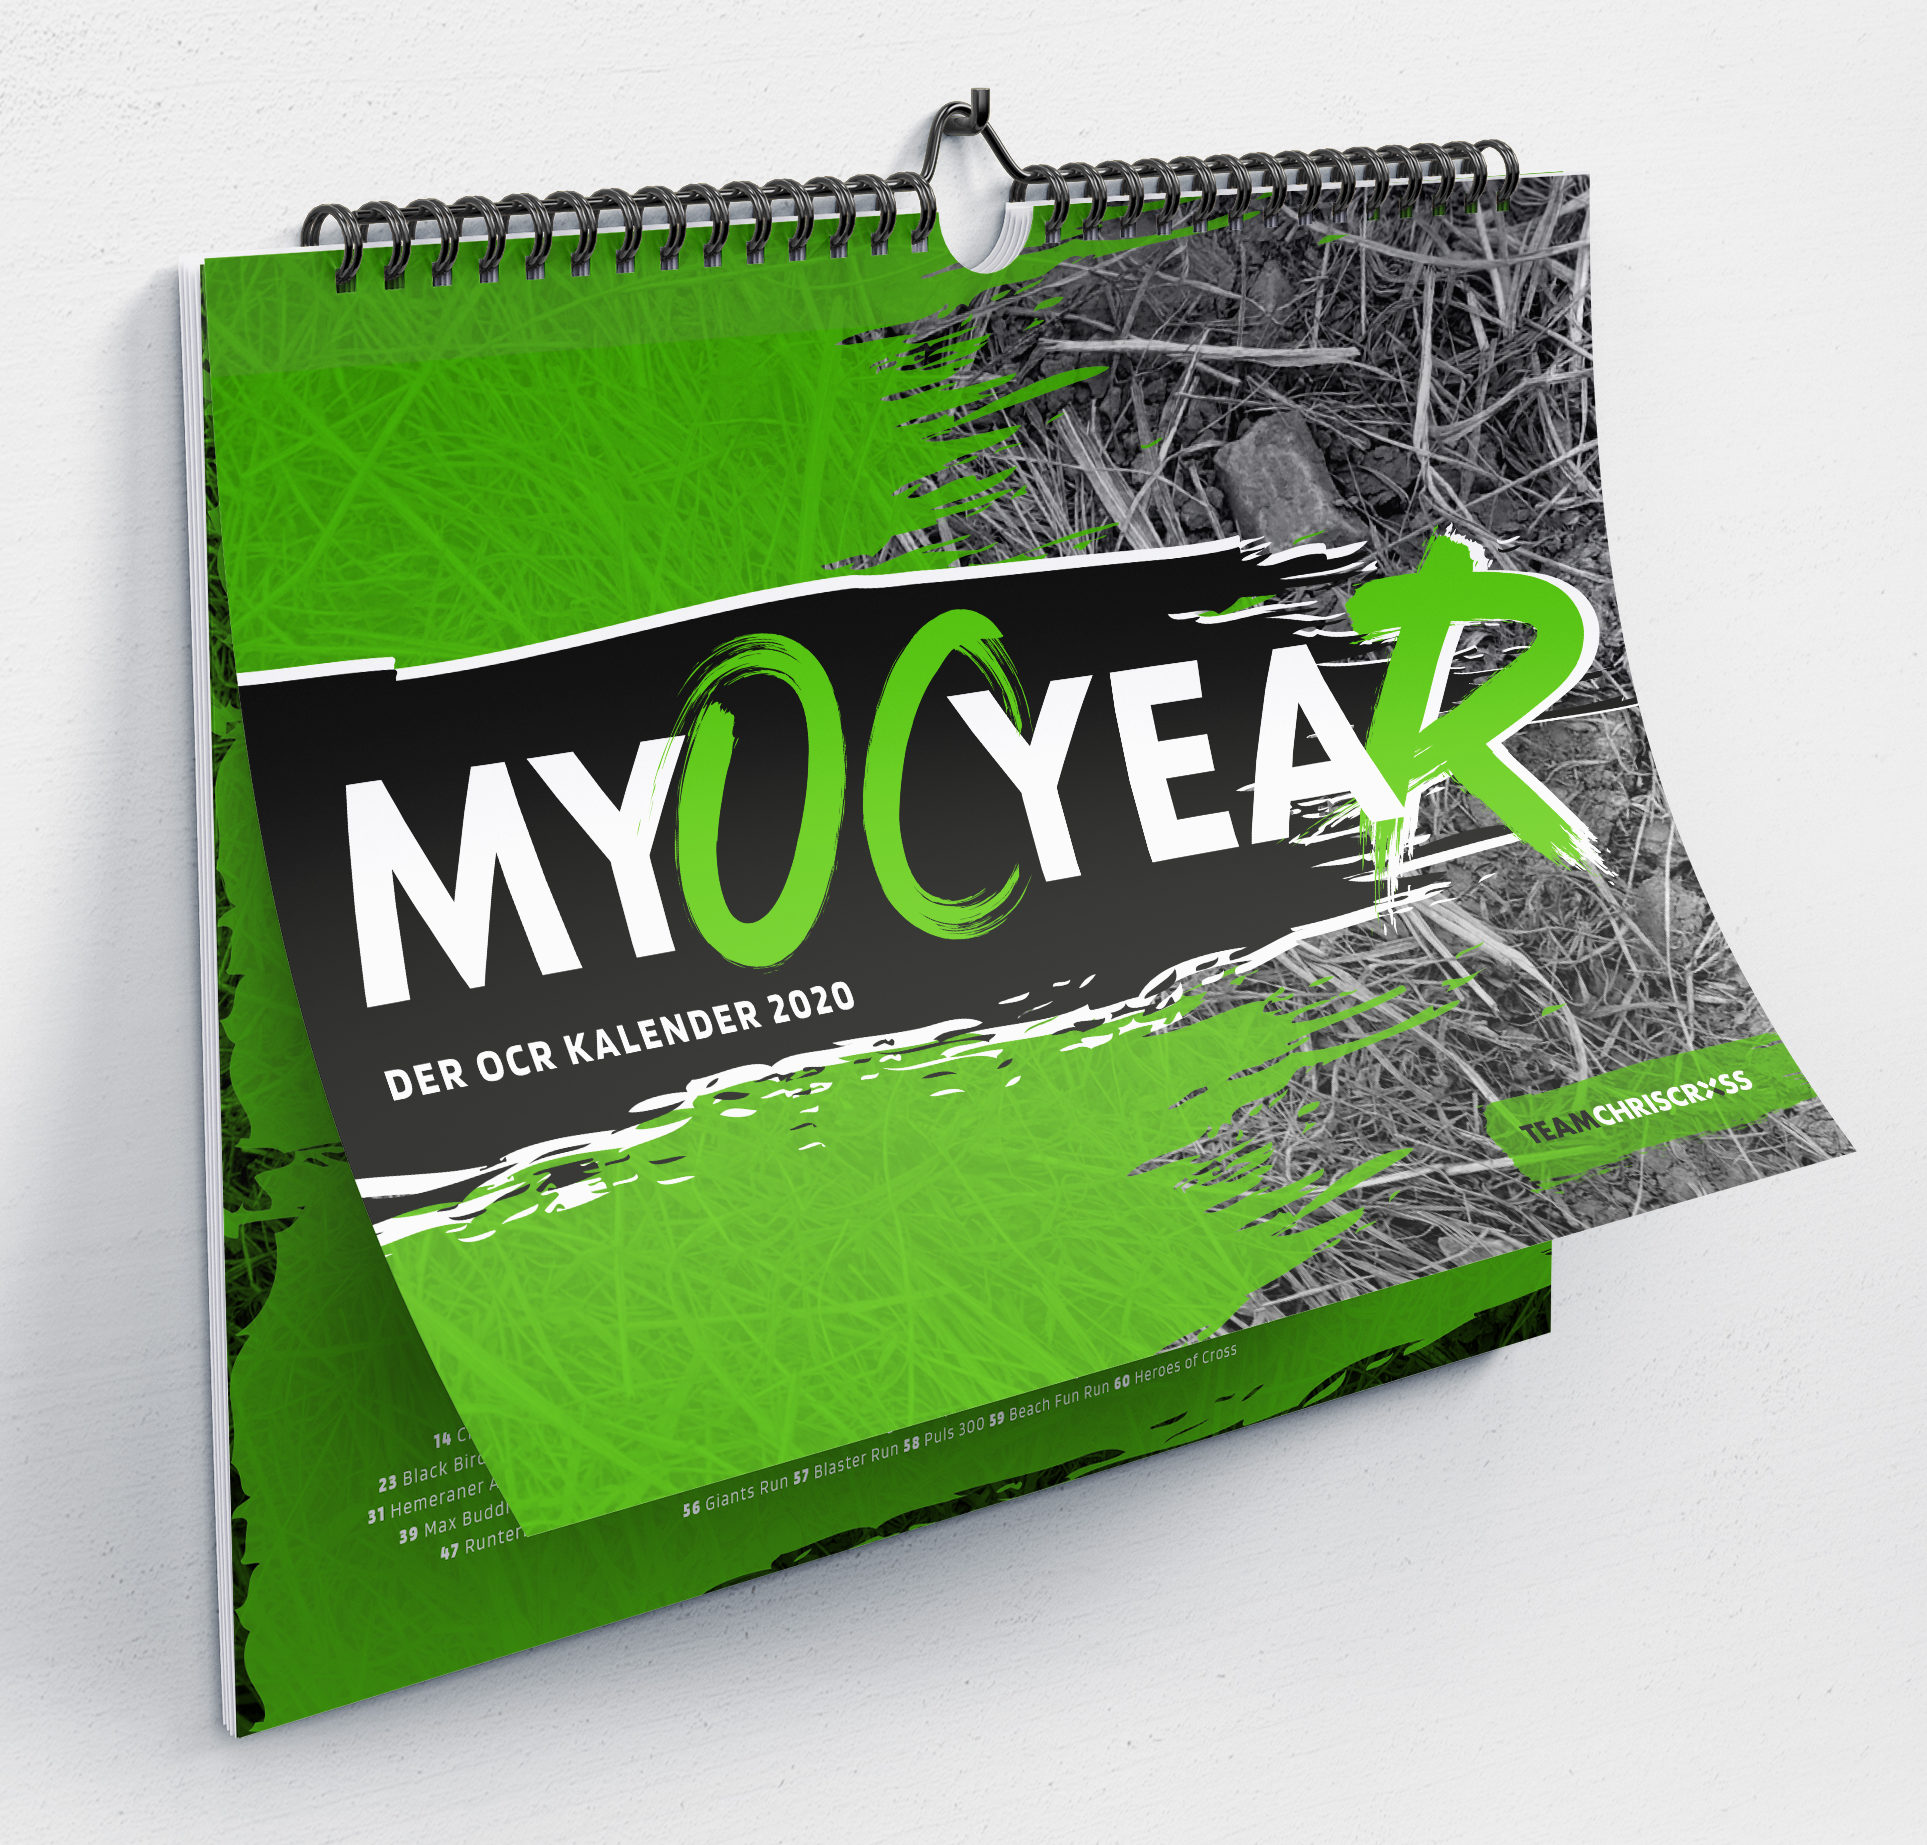 You are currently viewing OCR Kalender 2020 – myOCyeaR